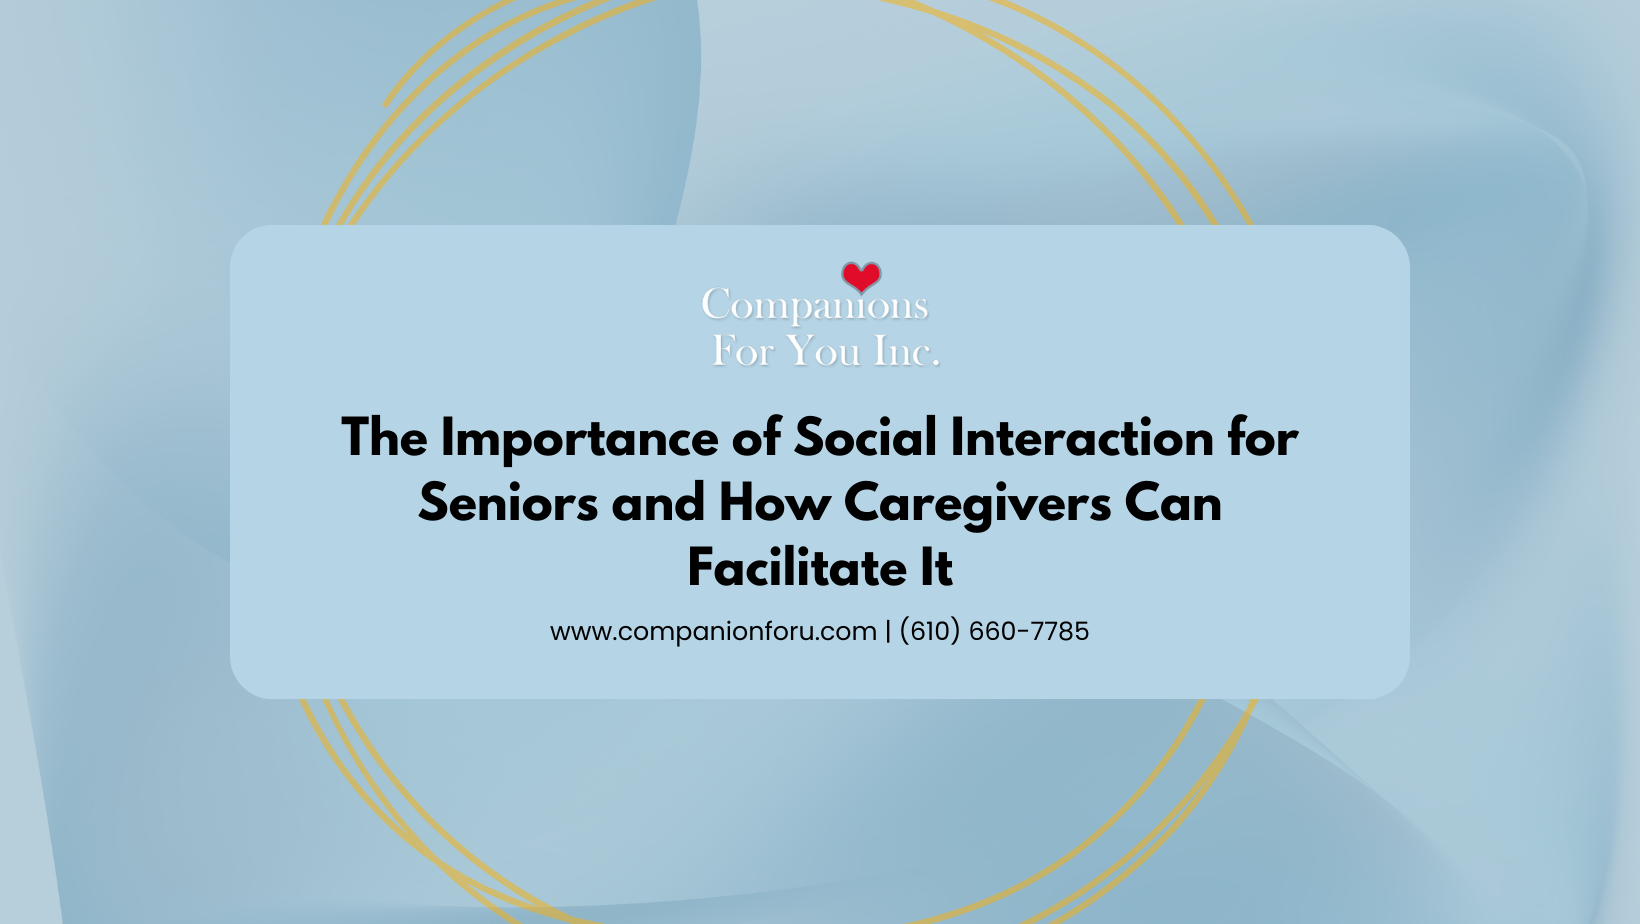 The Importance of Social Interaction for Seniors and How Caregivers Can Facilitate It